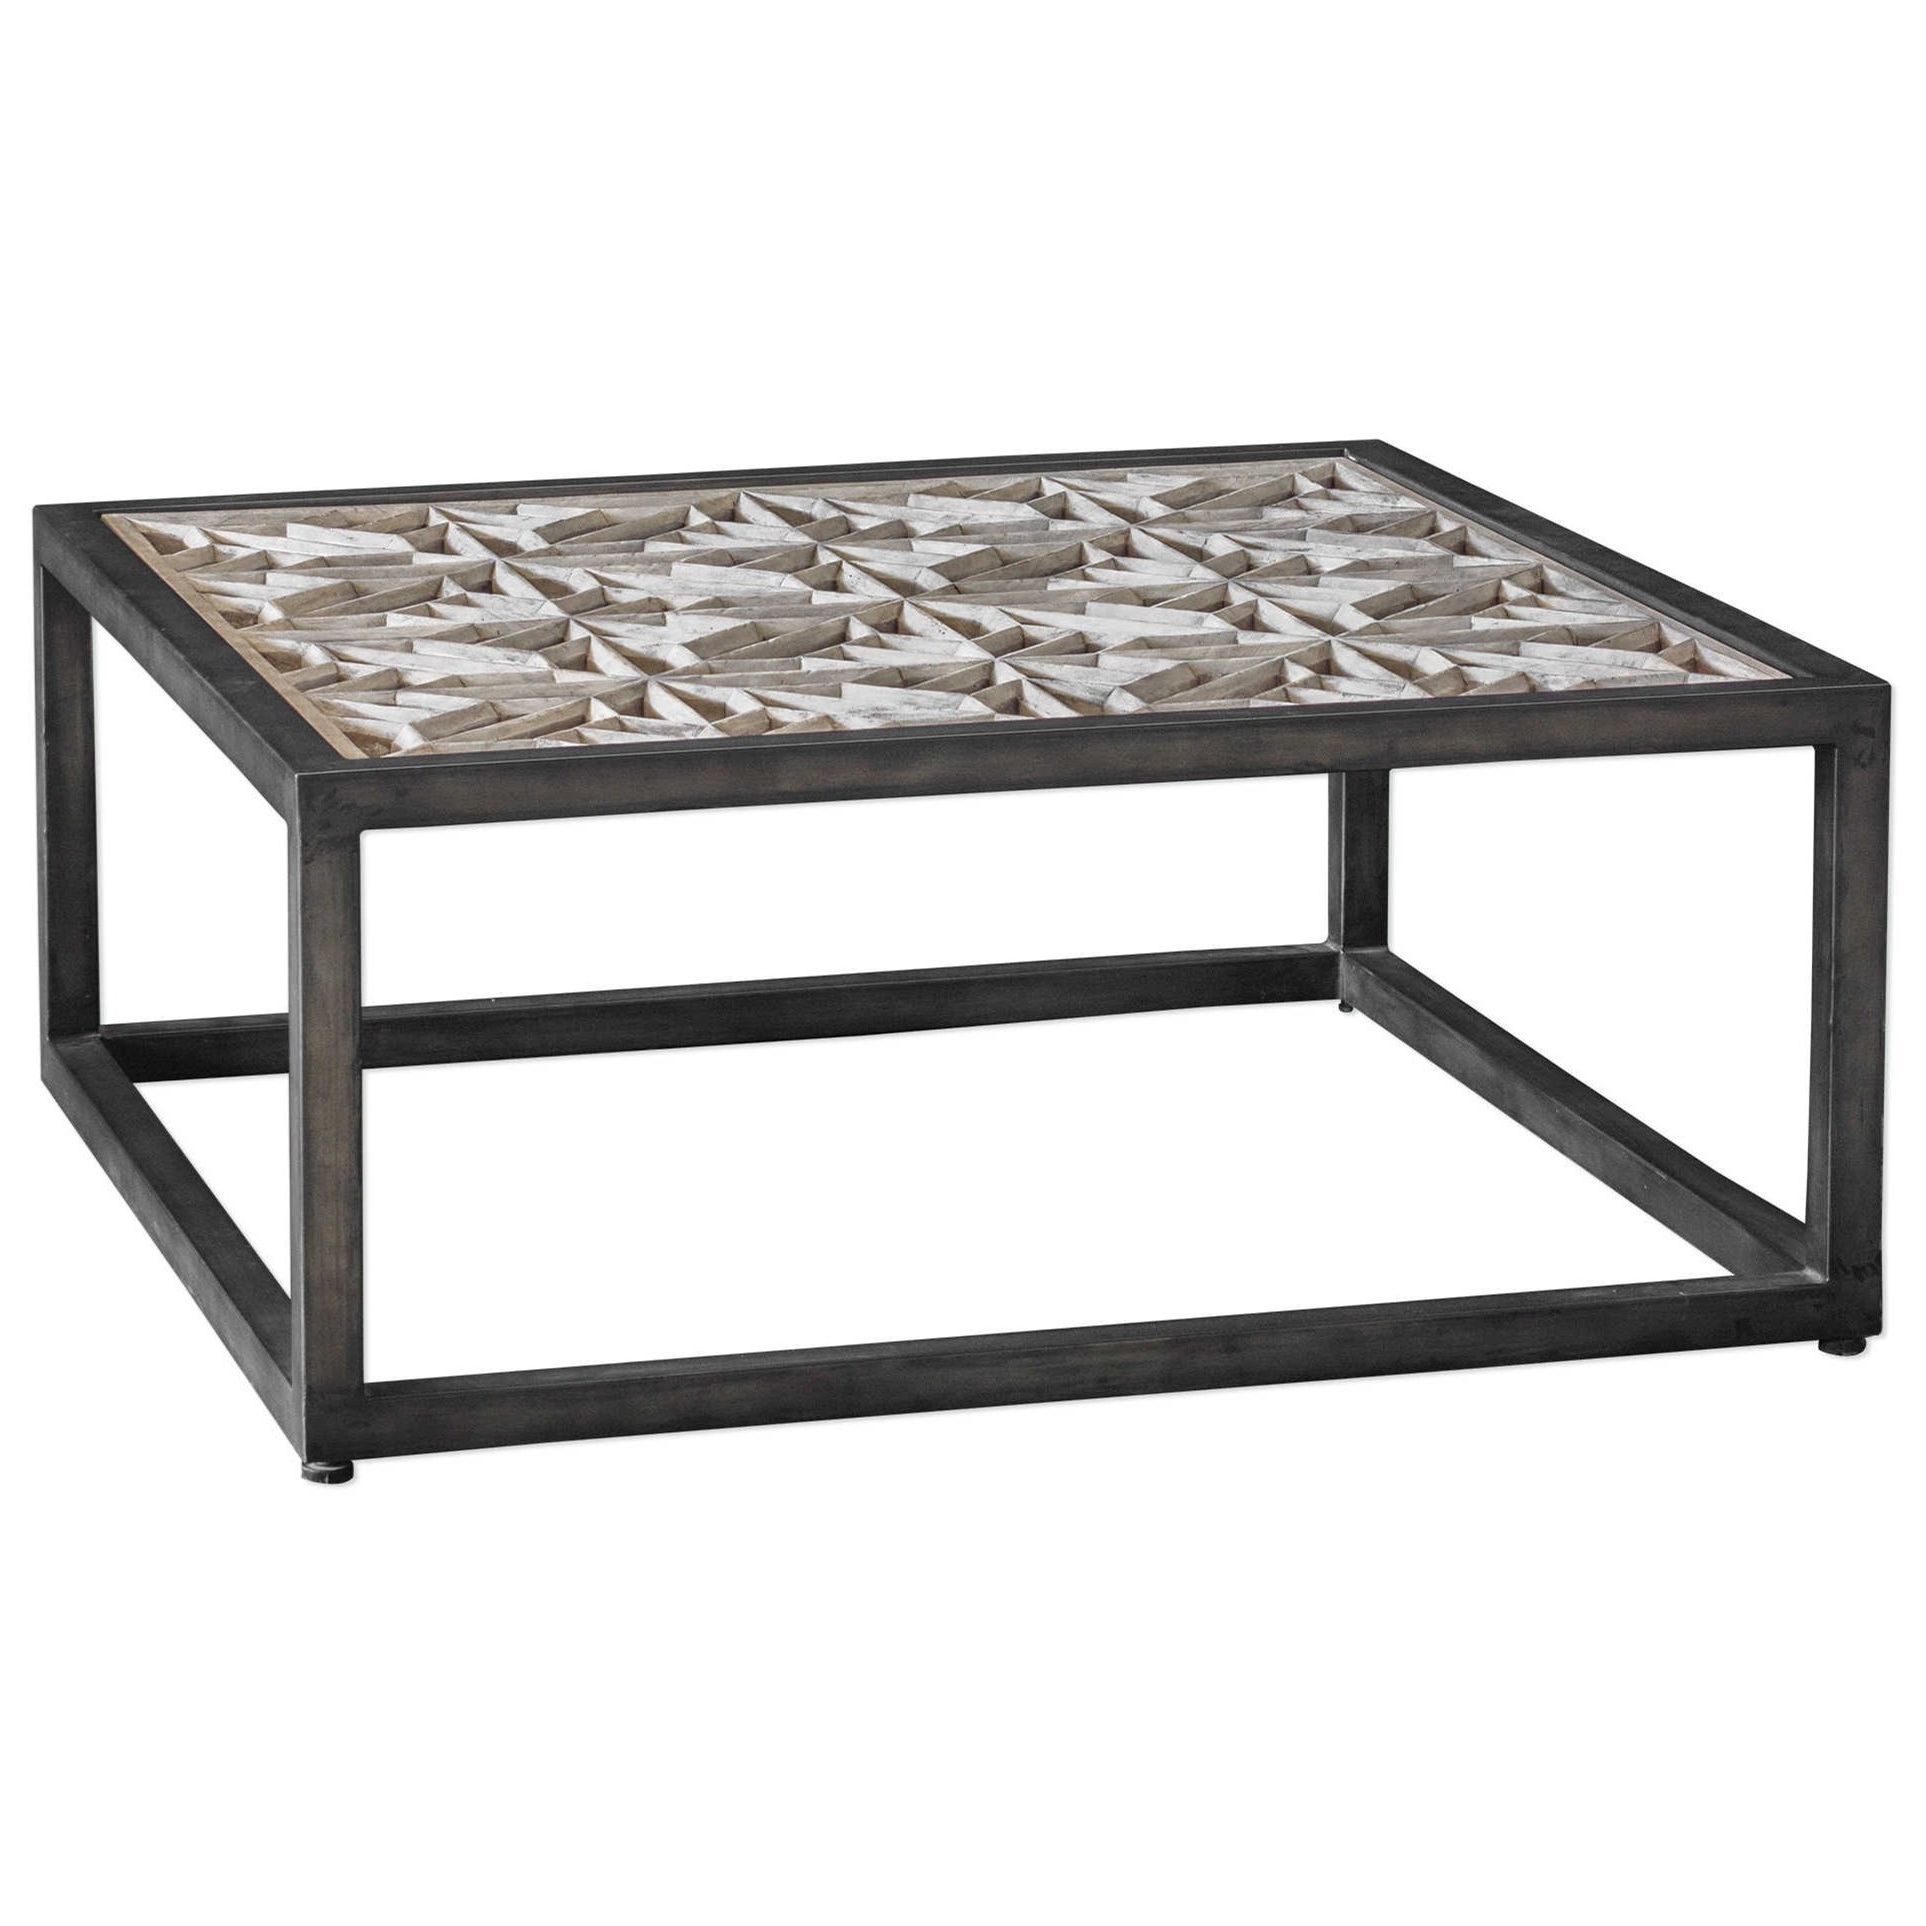 2018 Element Ivory Rectangular Coffee Tables Inside Uttermost Accent Furniture 25759 Baruti Industrial Coffee Table (View 10 of 20)